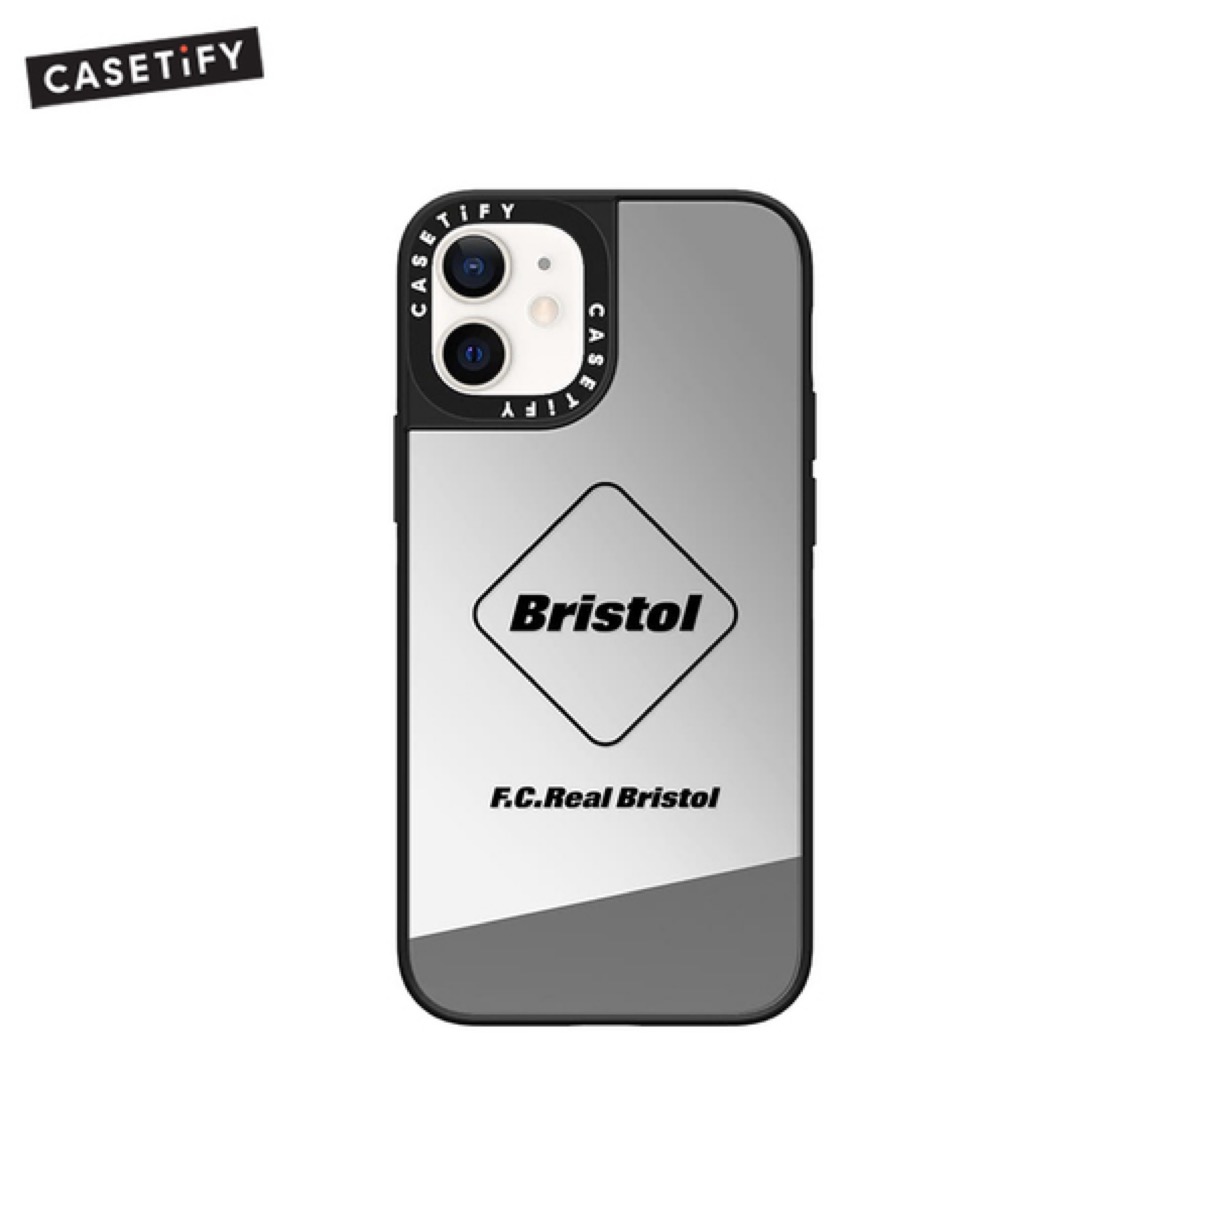 FCRB CASETiFY SILVER CASE iPhone12pro用-